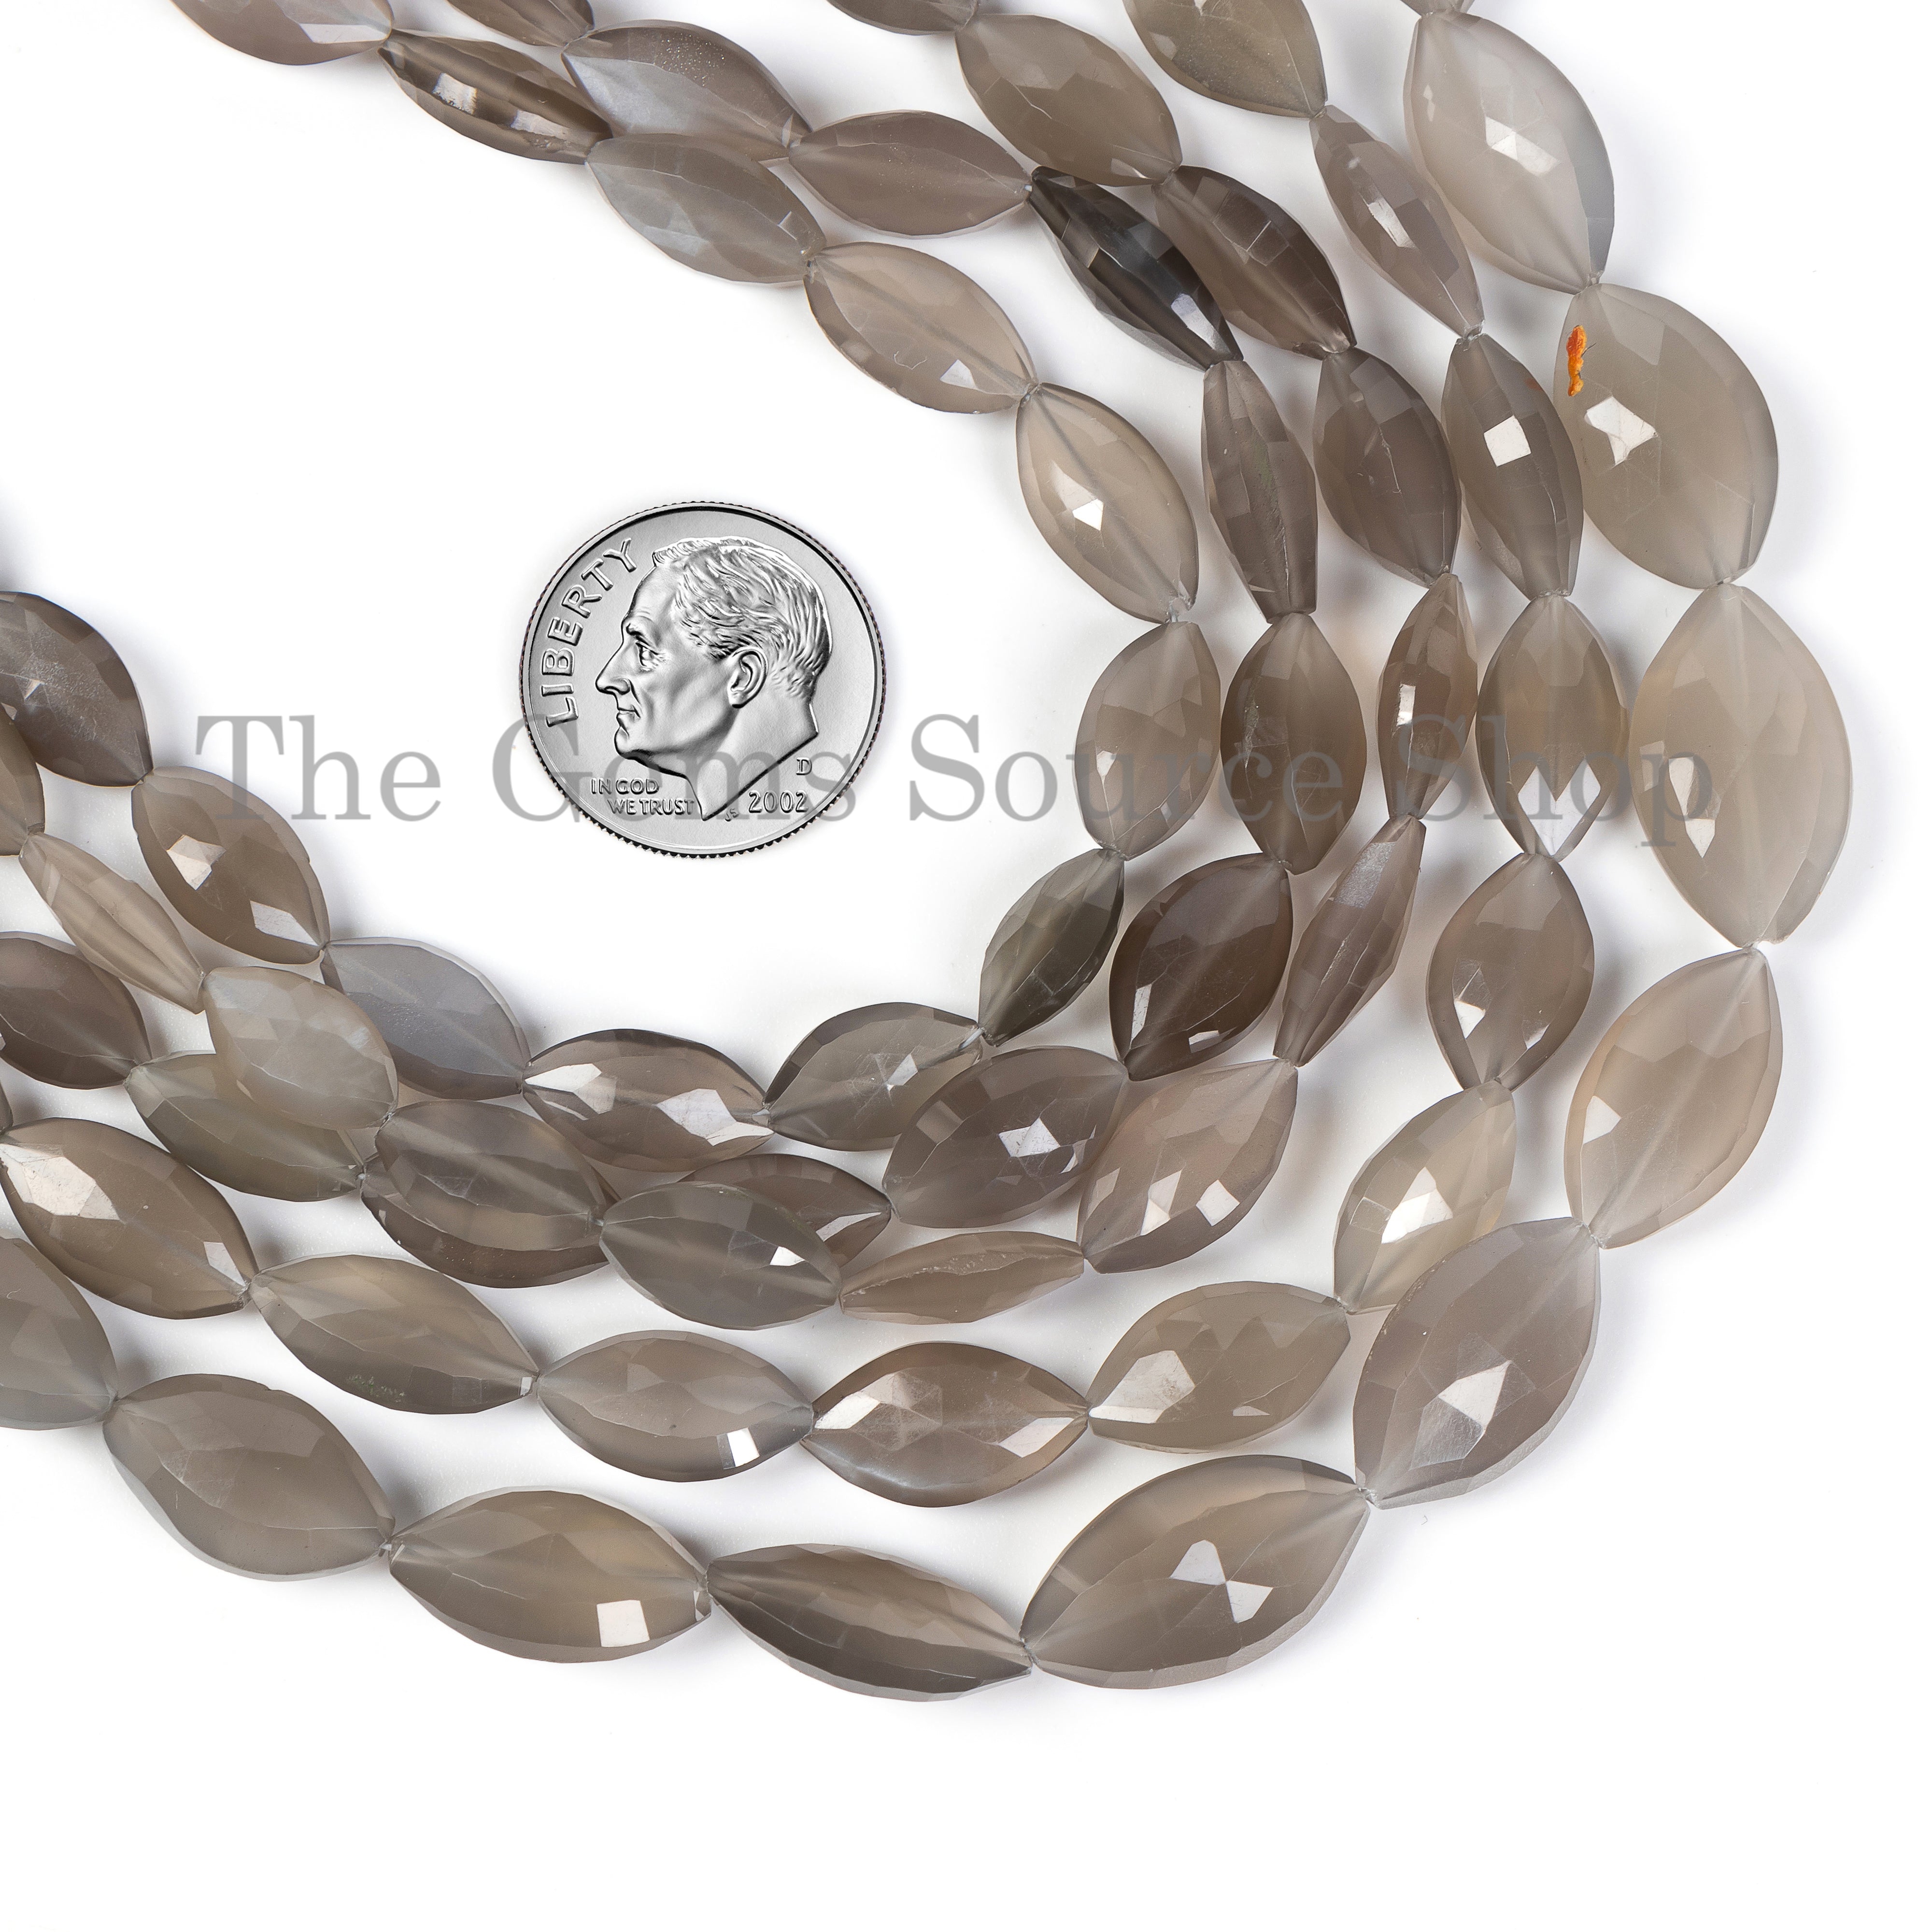 Grey Moonstone Faceted Marquise Beads, Natural Moonstone Gemstone Faceted Beads for Jewelry Making. TGS-5090